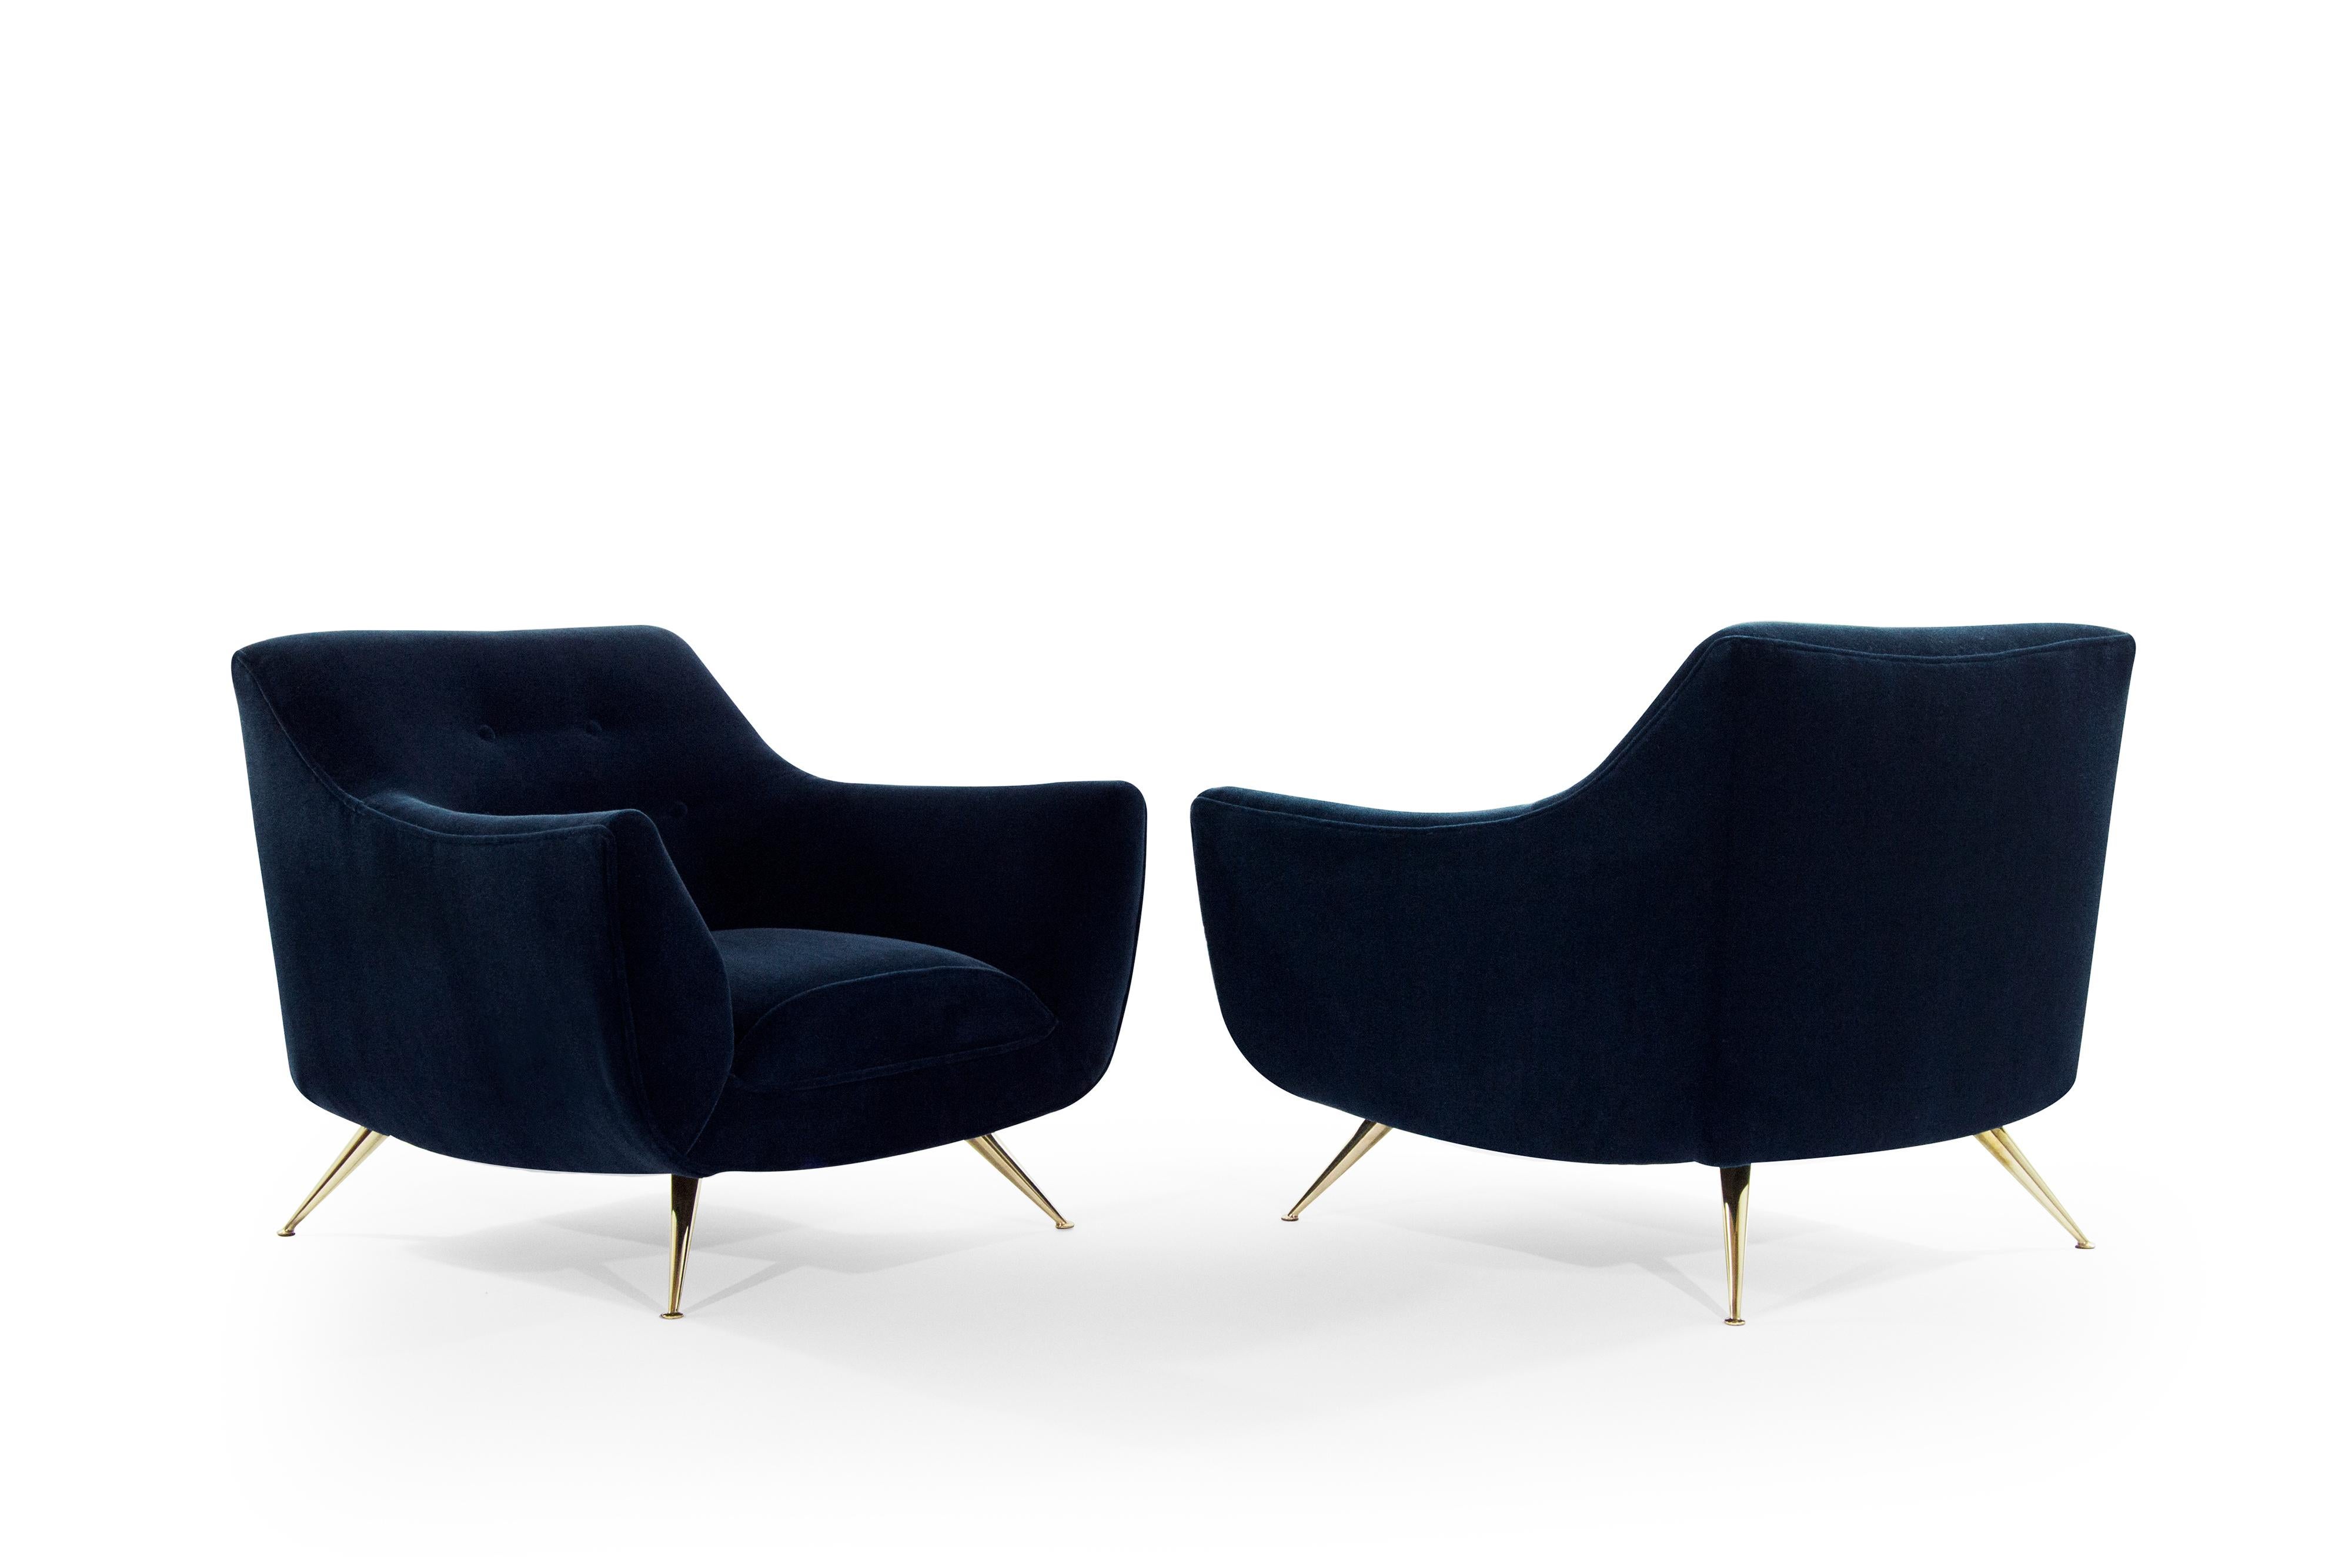 Pair of Henry Glass lounge chairs, newly upholstered in midnight blue mohair.

Chairs have been completely restored to their original integrity. They boast handcut high grade foam, as well as hand polished brass legs. Extremely rare pair perfect